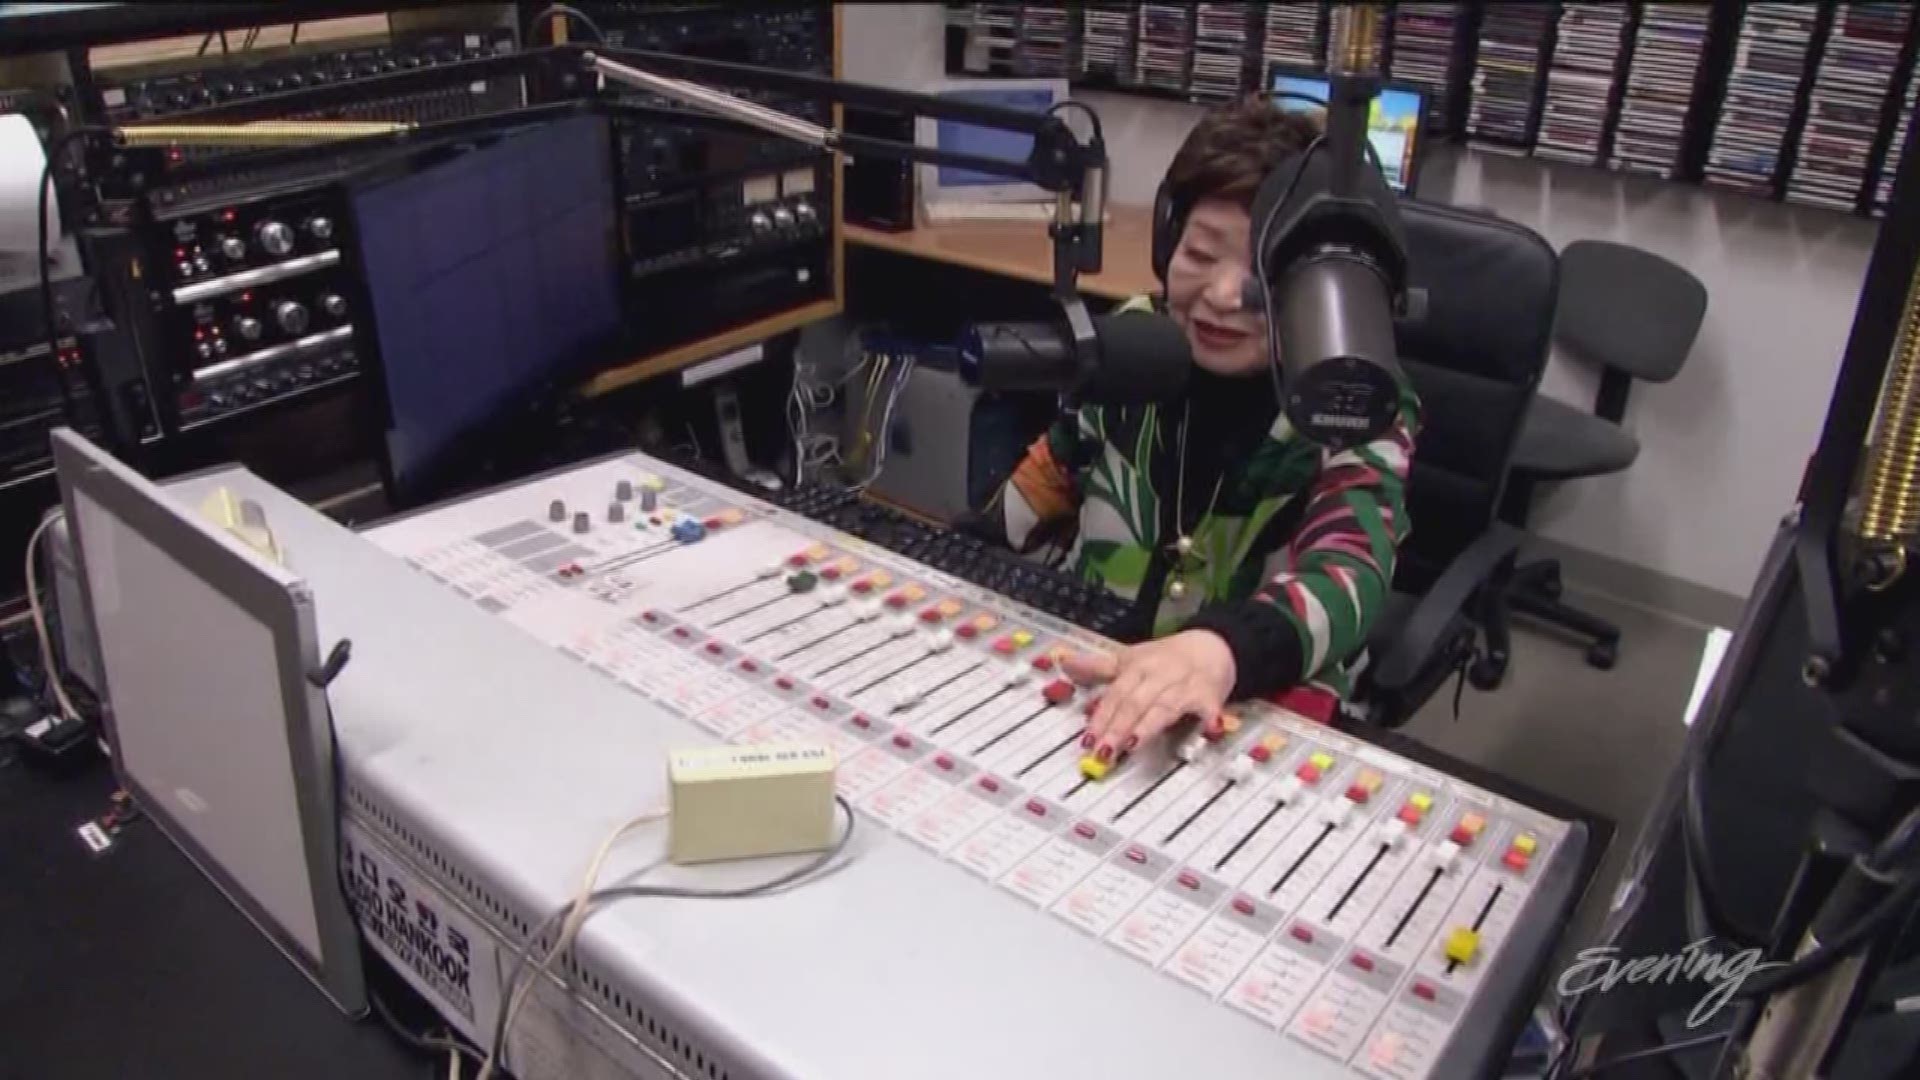 Radio Hankook plays K-Pop and offers advice to thousands of people with Korean heritage